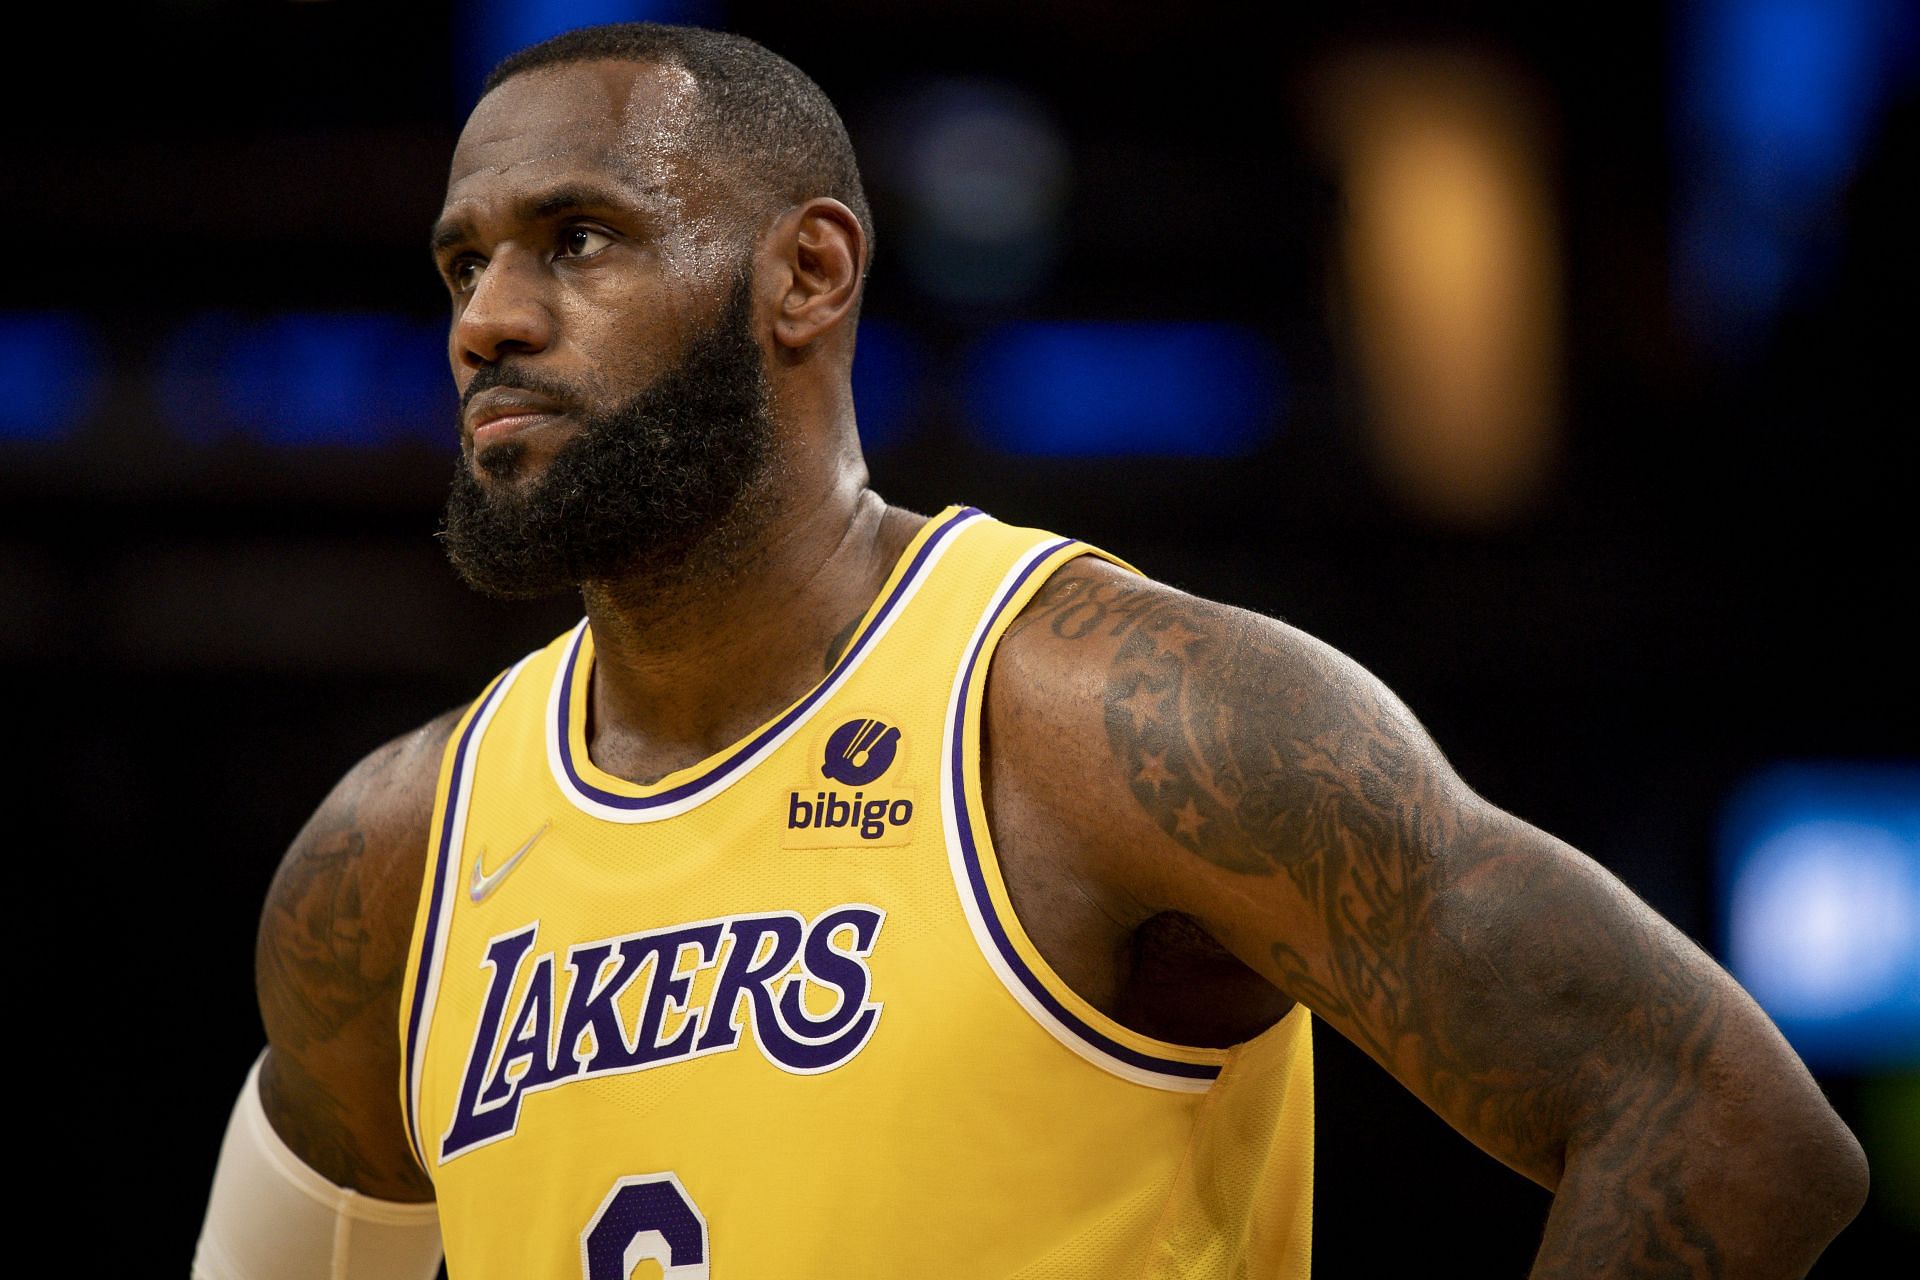 LeBron James of the LA Lakers is likely to play despite his status